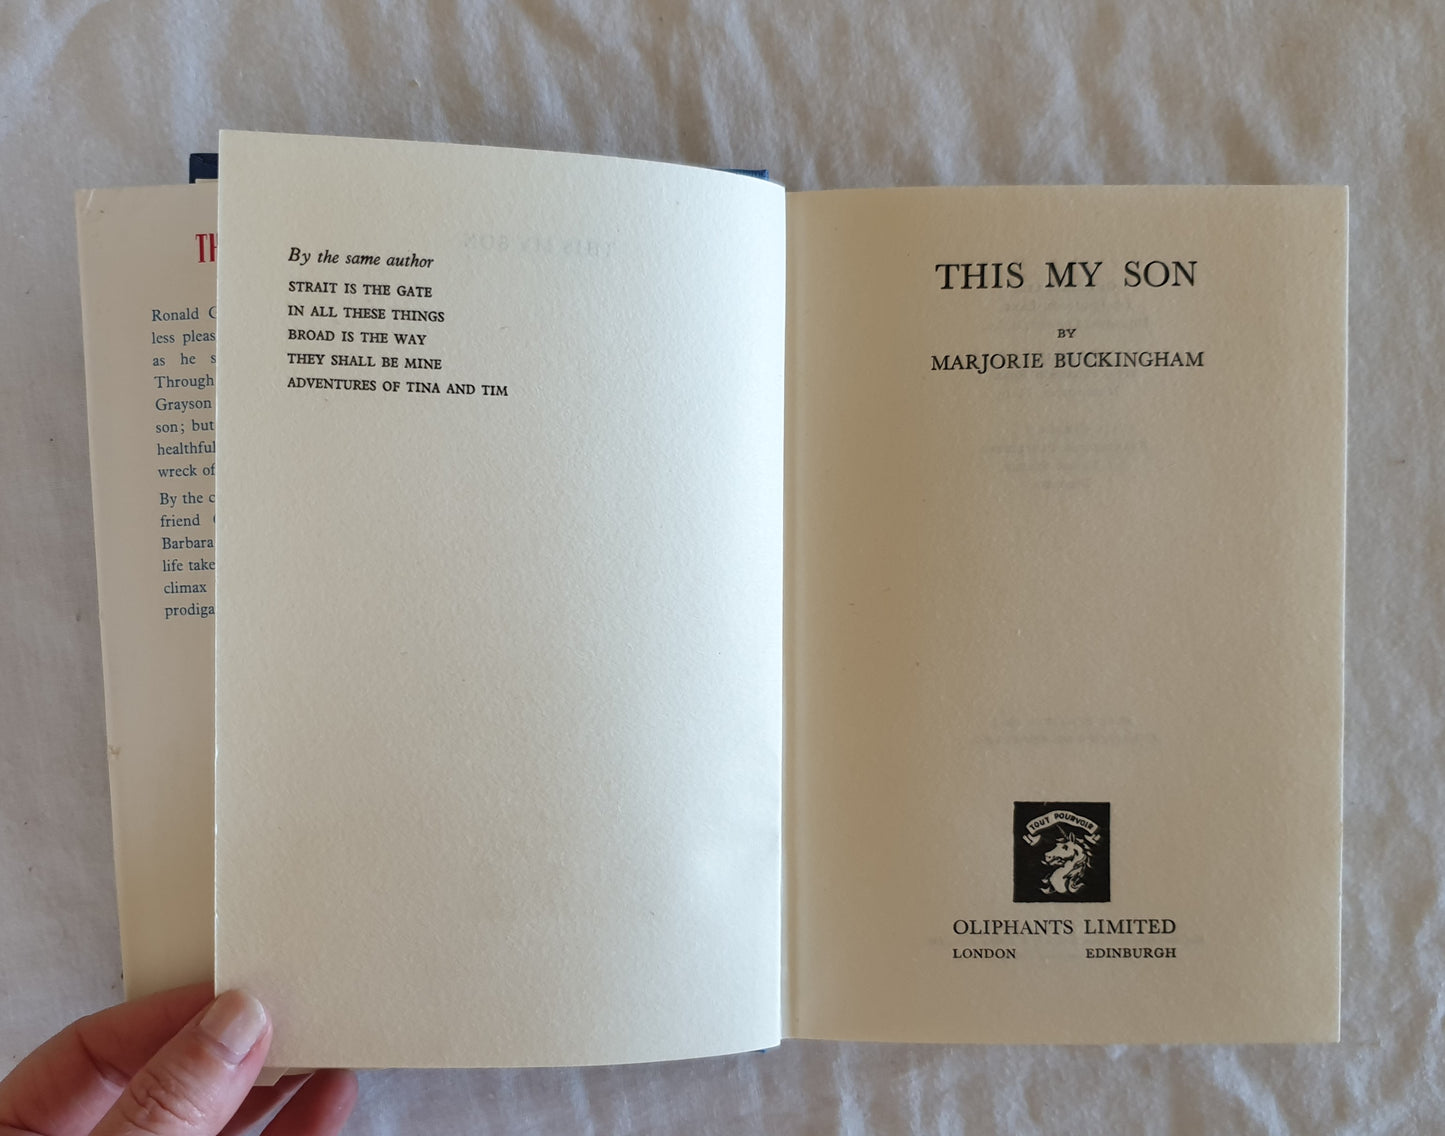 This My Son by Marjorie Buckingham